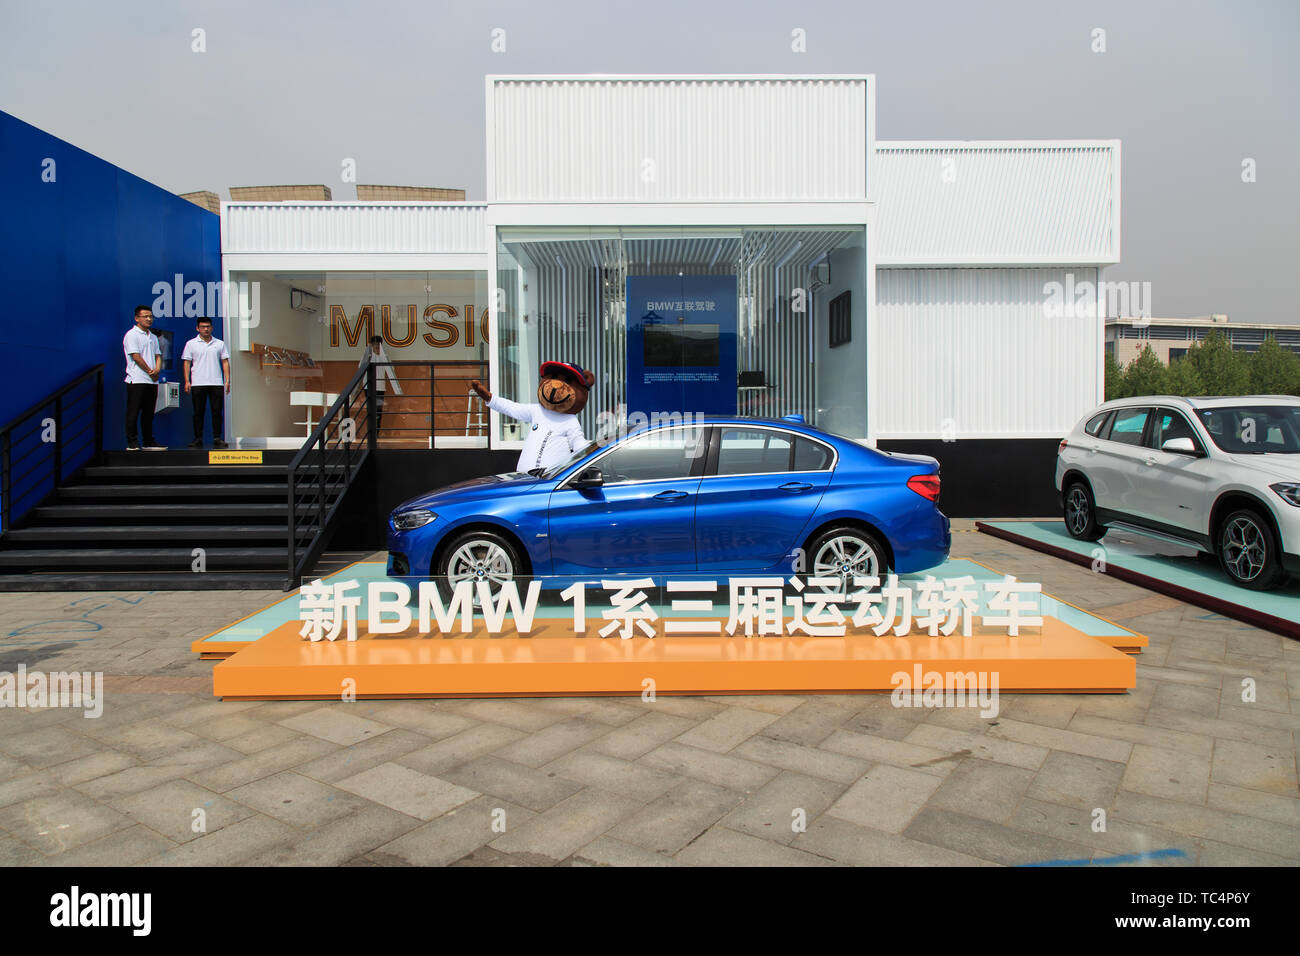 Page 2 The Box Of Bmw High Resolution Stock Photography And Images Alamy